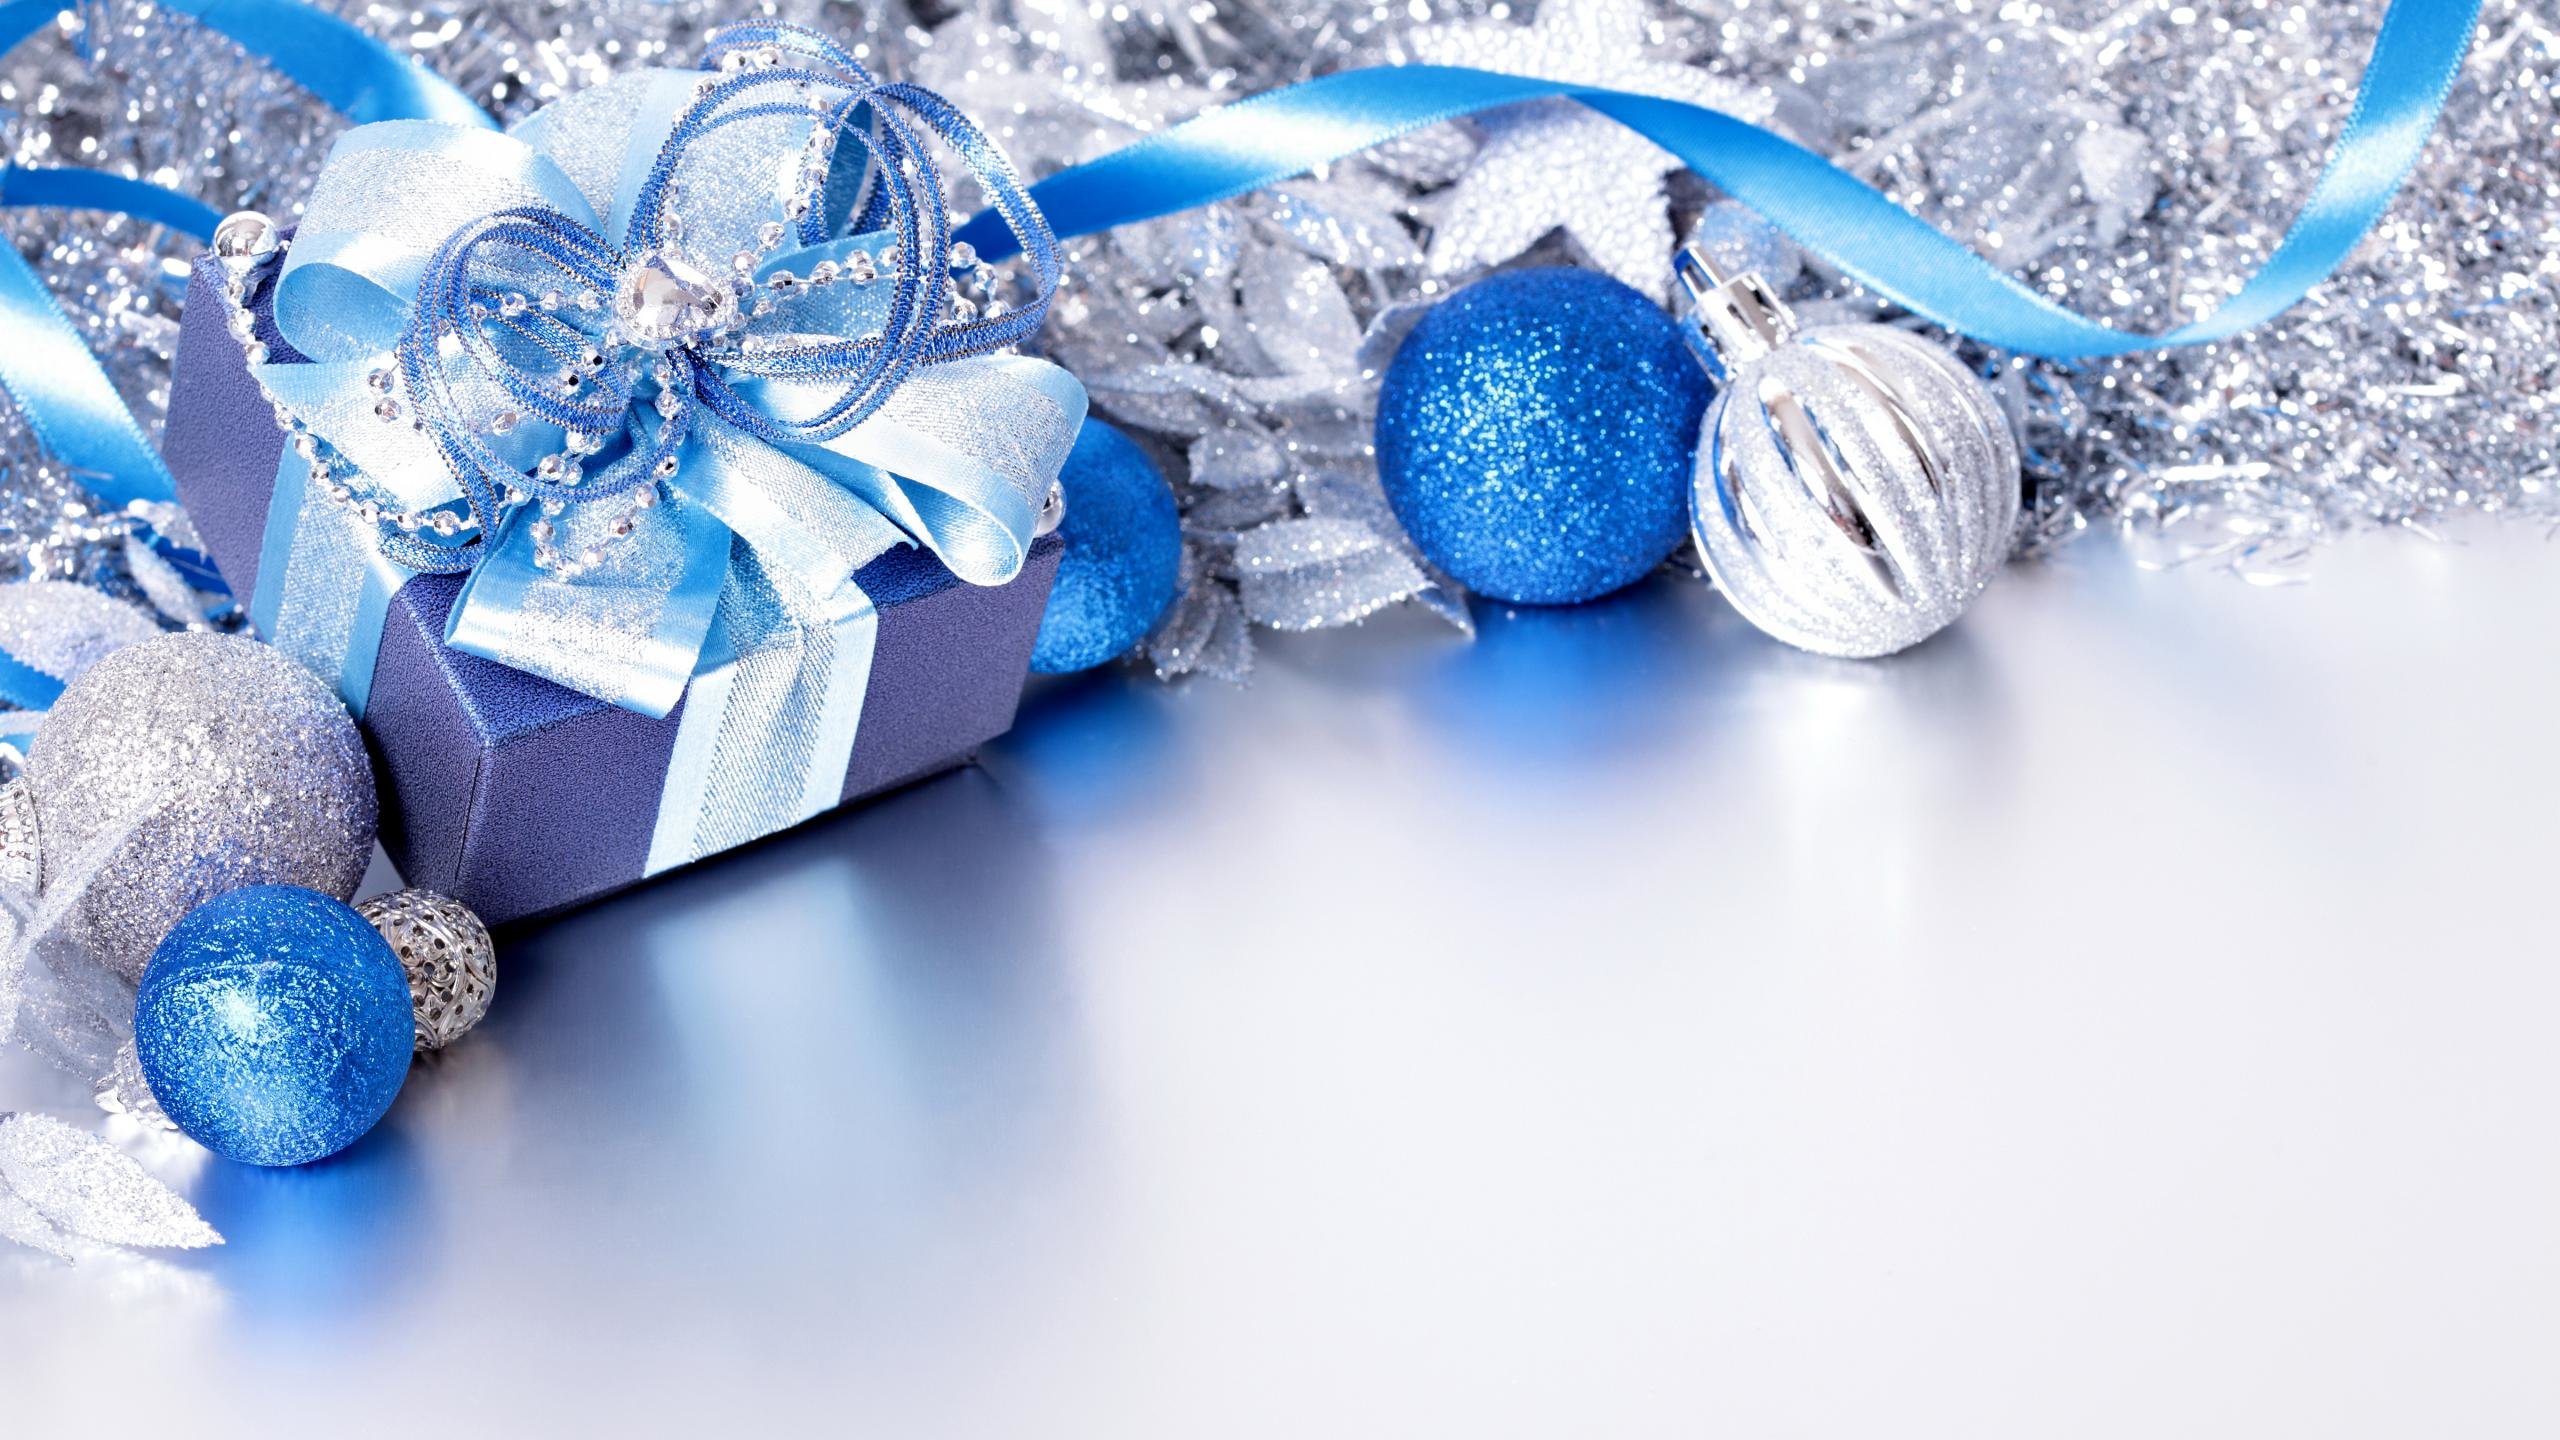 High resolution Christmas Ornaments/Decorations hd 2560x1440 wallpaper ID:434232 for computer